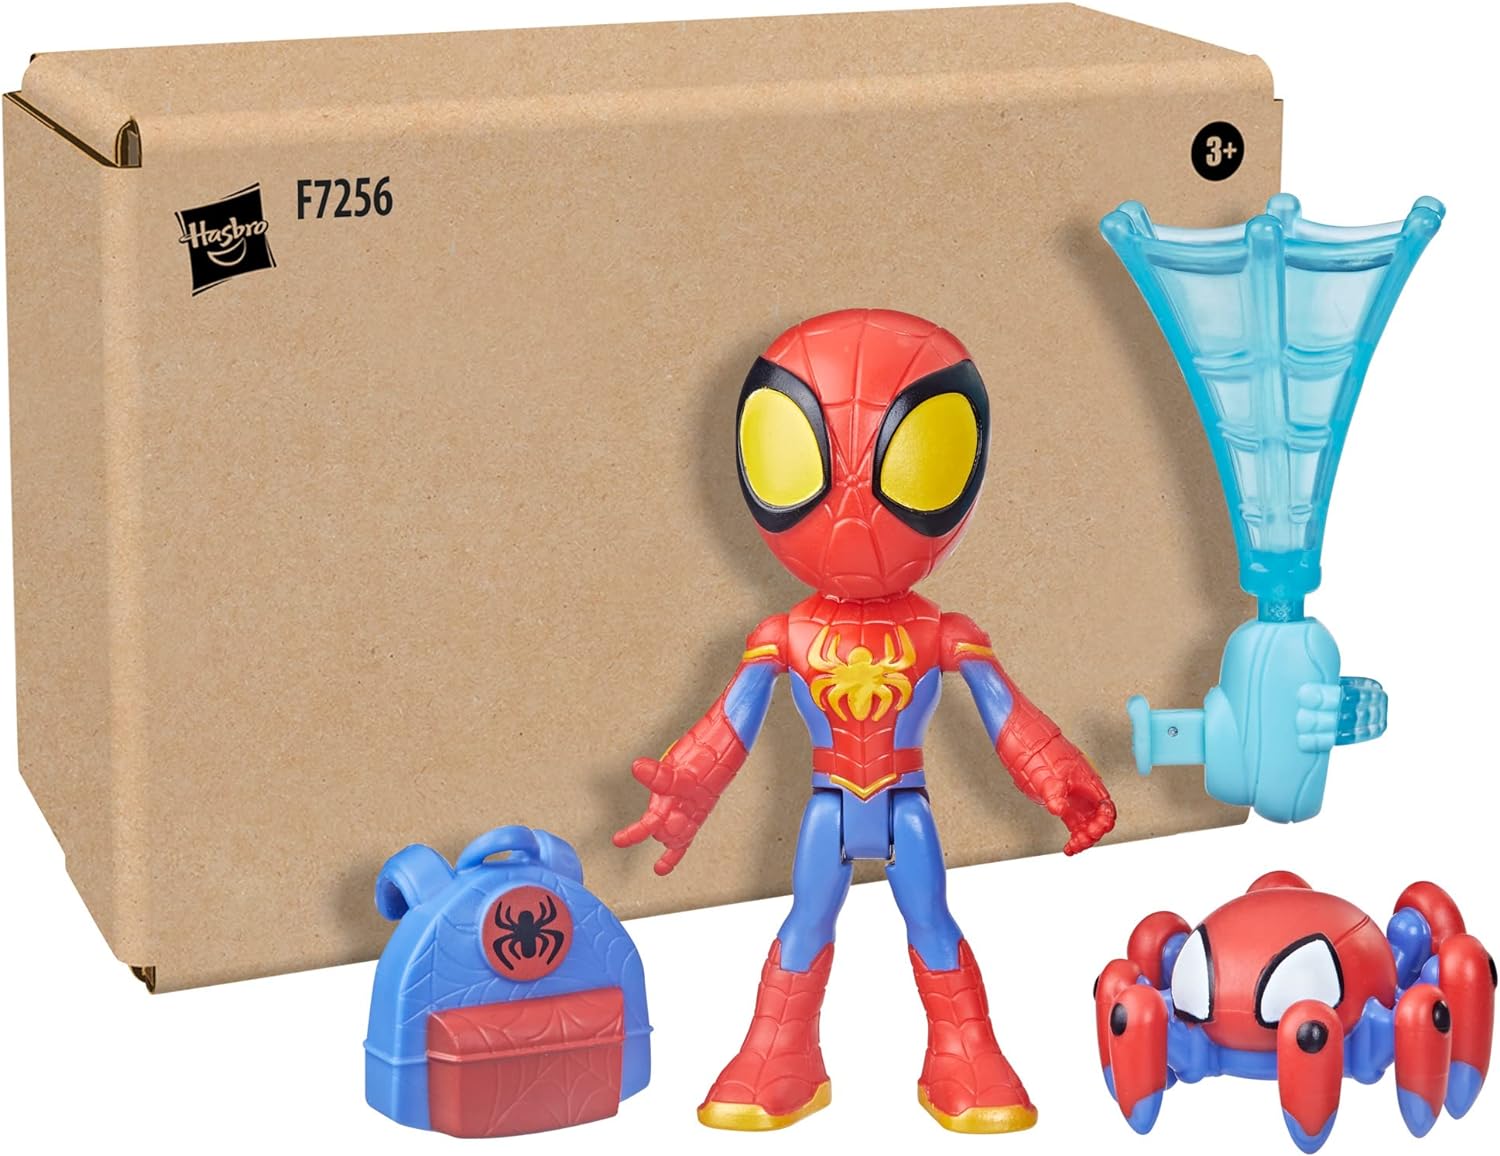 Spidey and His Amazing Friends Web-Spinners Spidey 4-Inch Action Figure with Accessories, Web-Spinning Accessory, Marvel Toys for Kids, Ages 3 and Up